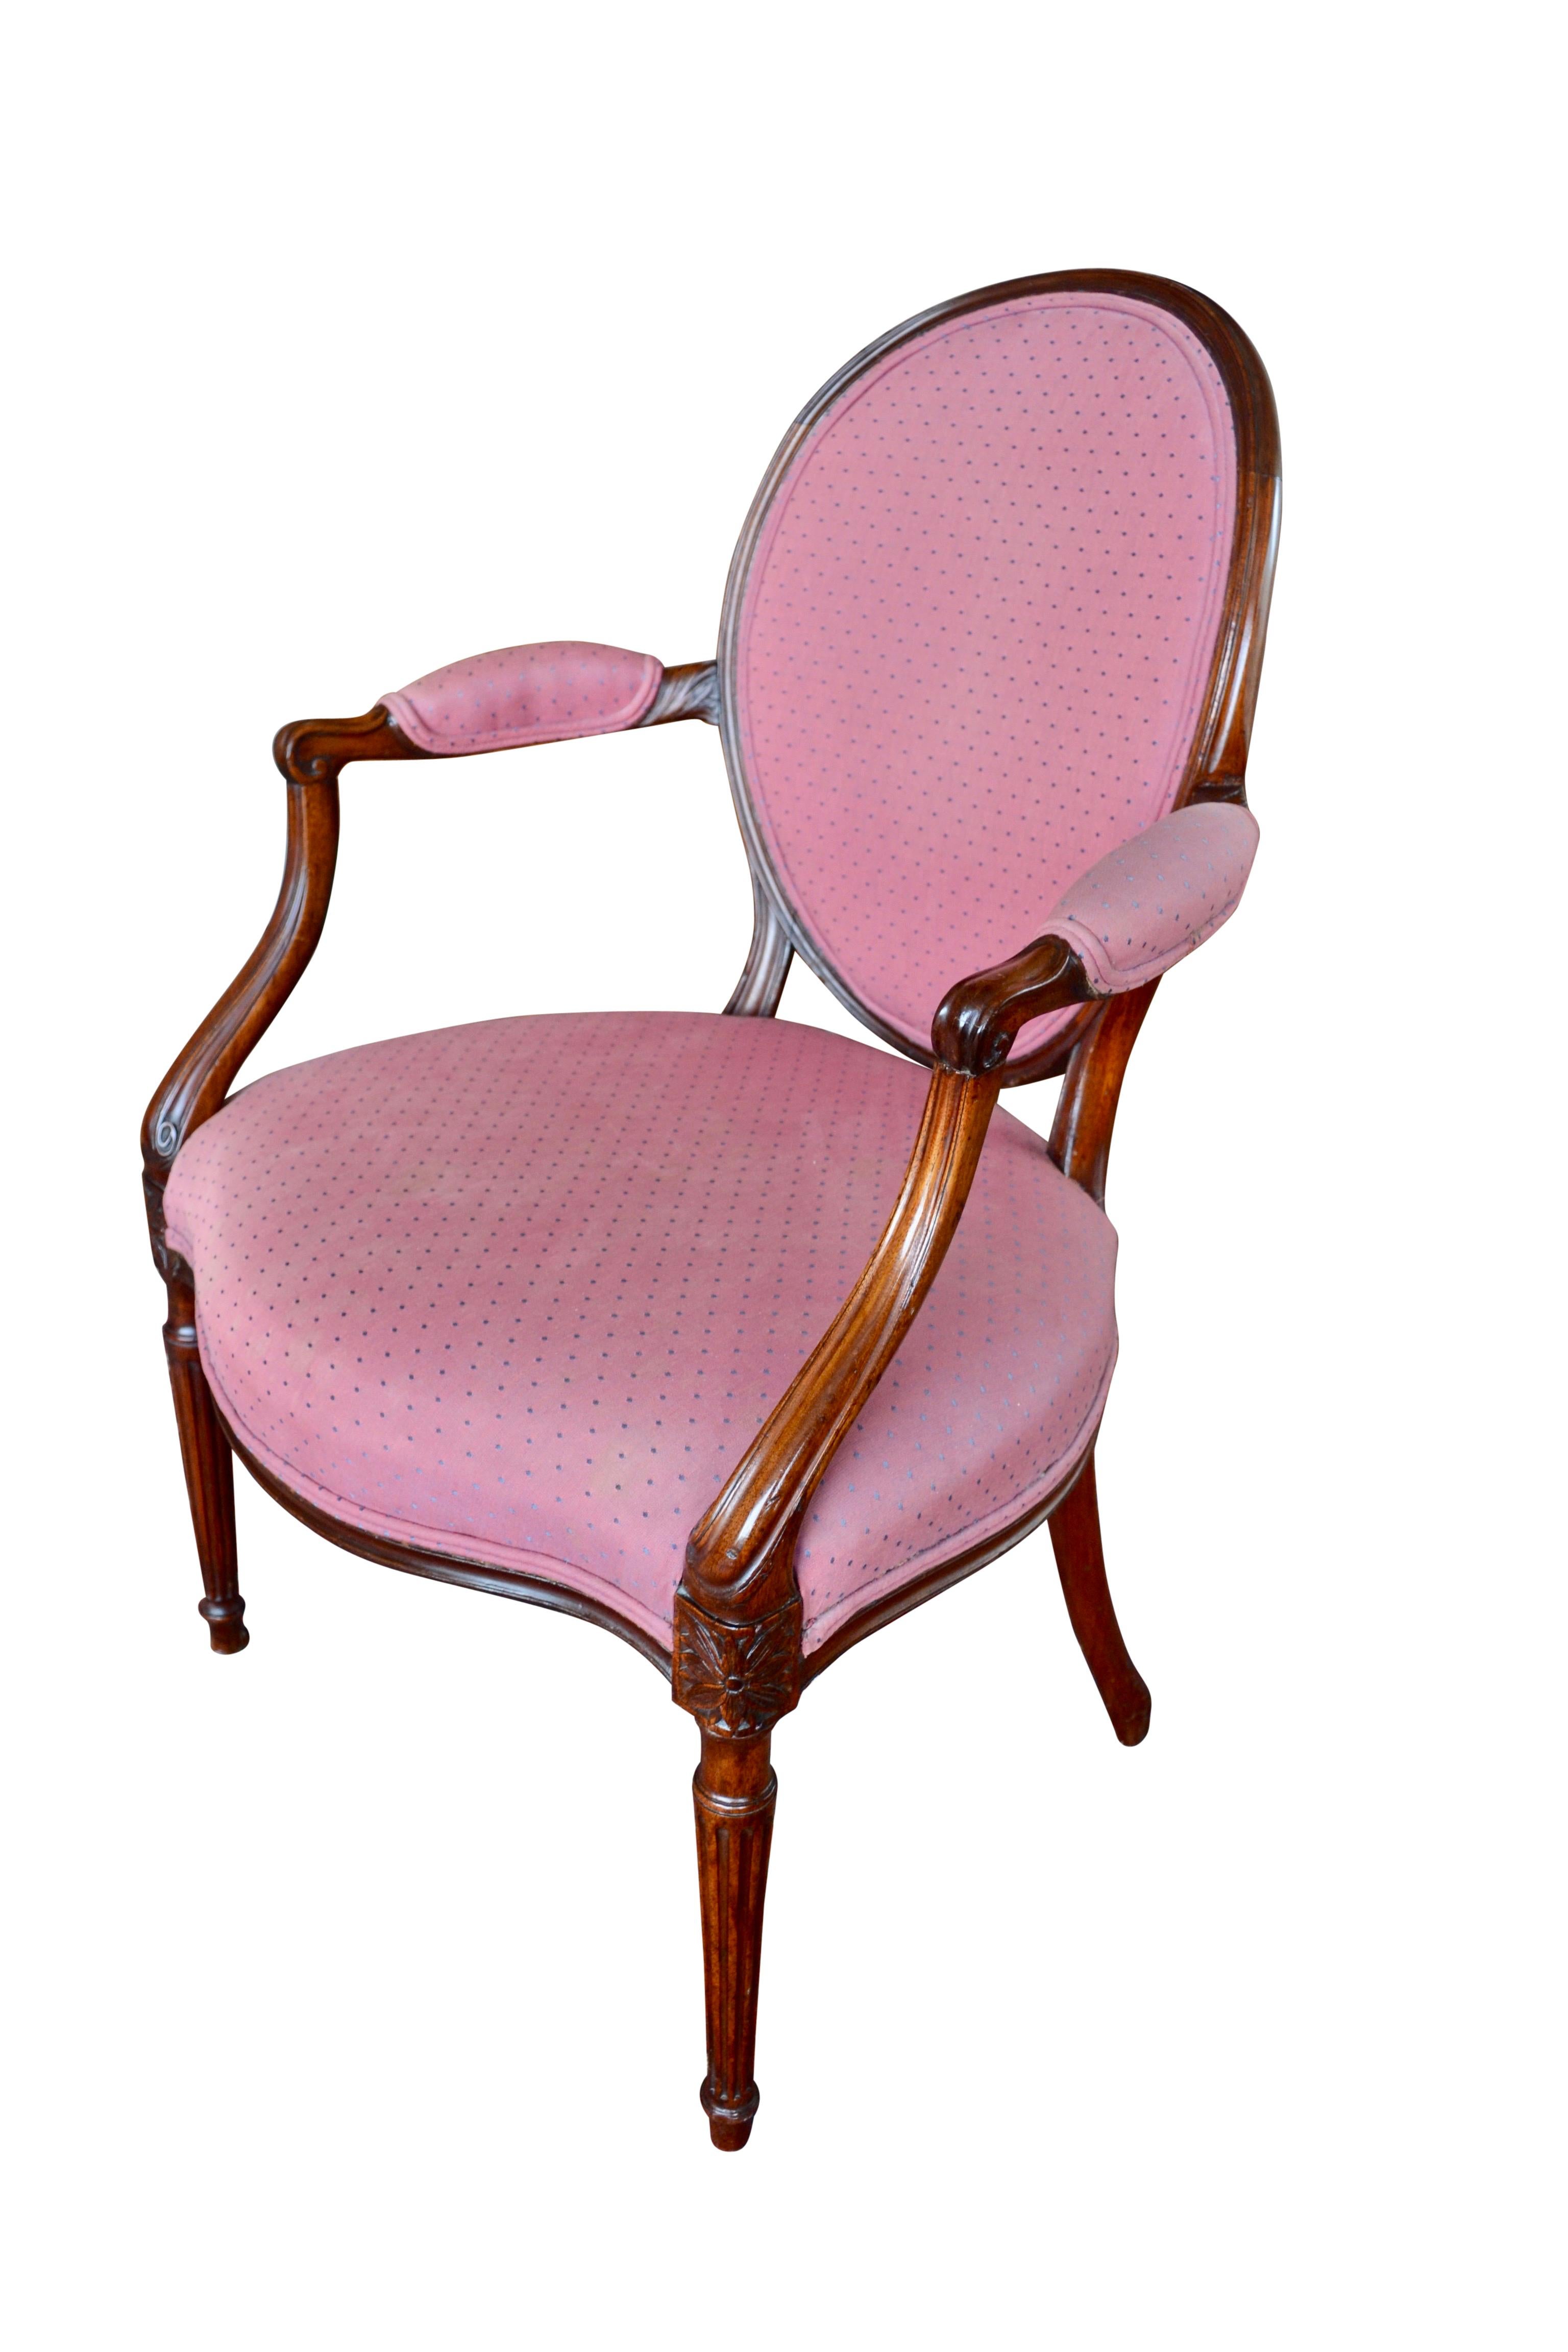 An elegant period George III Hepplewhite style oval-backed armchair of well carved solid mahogany.